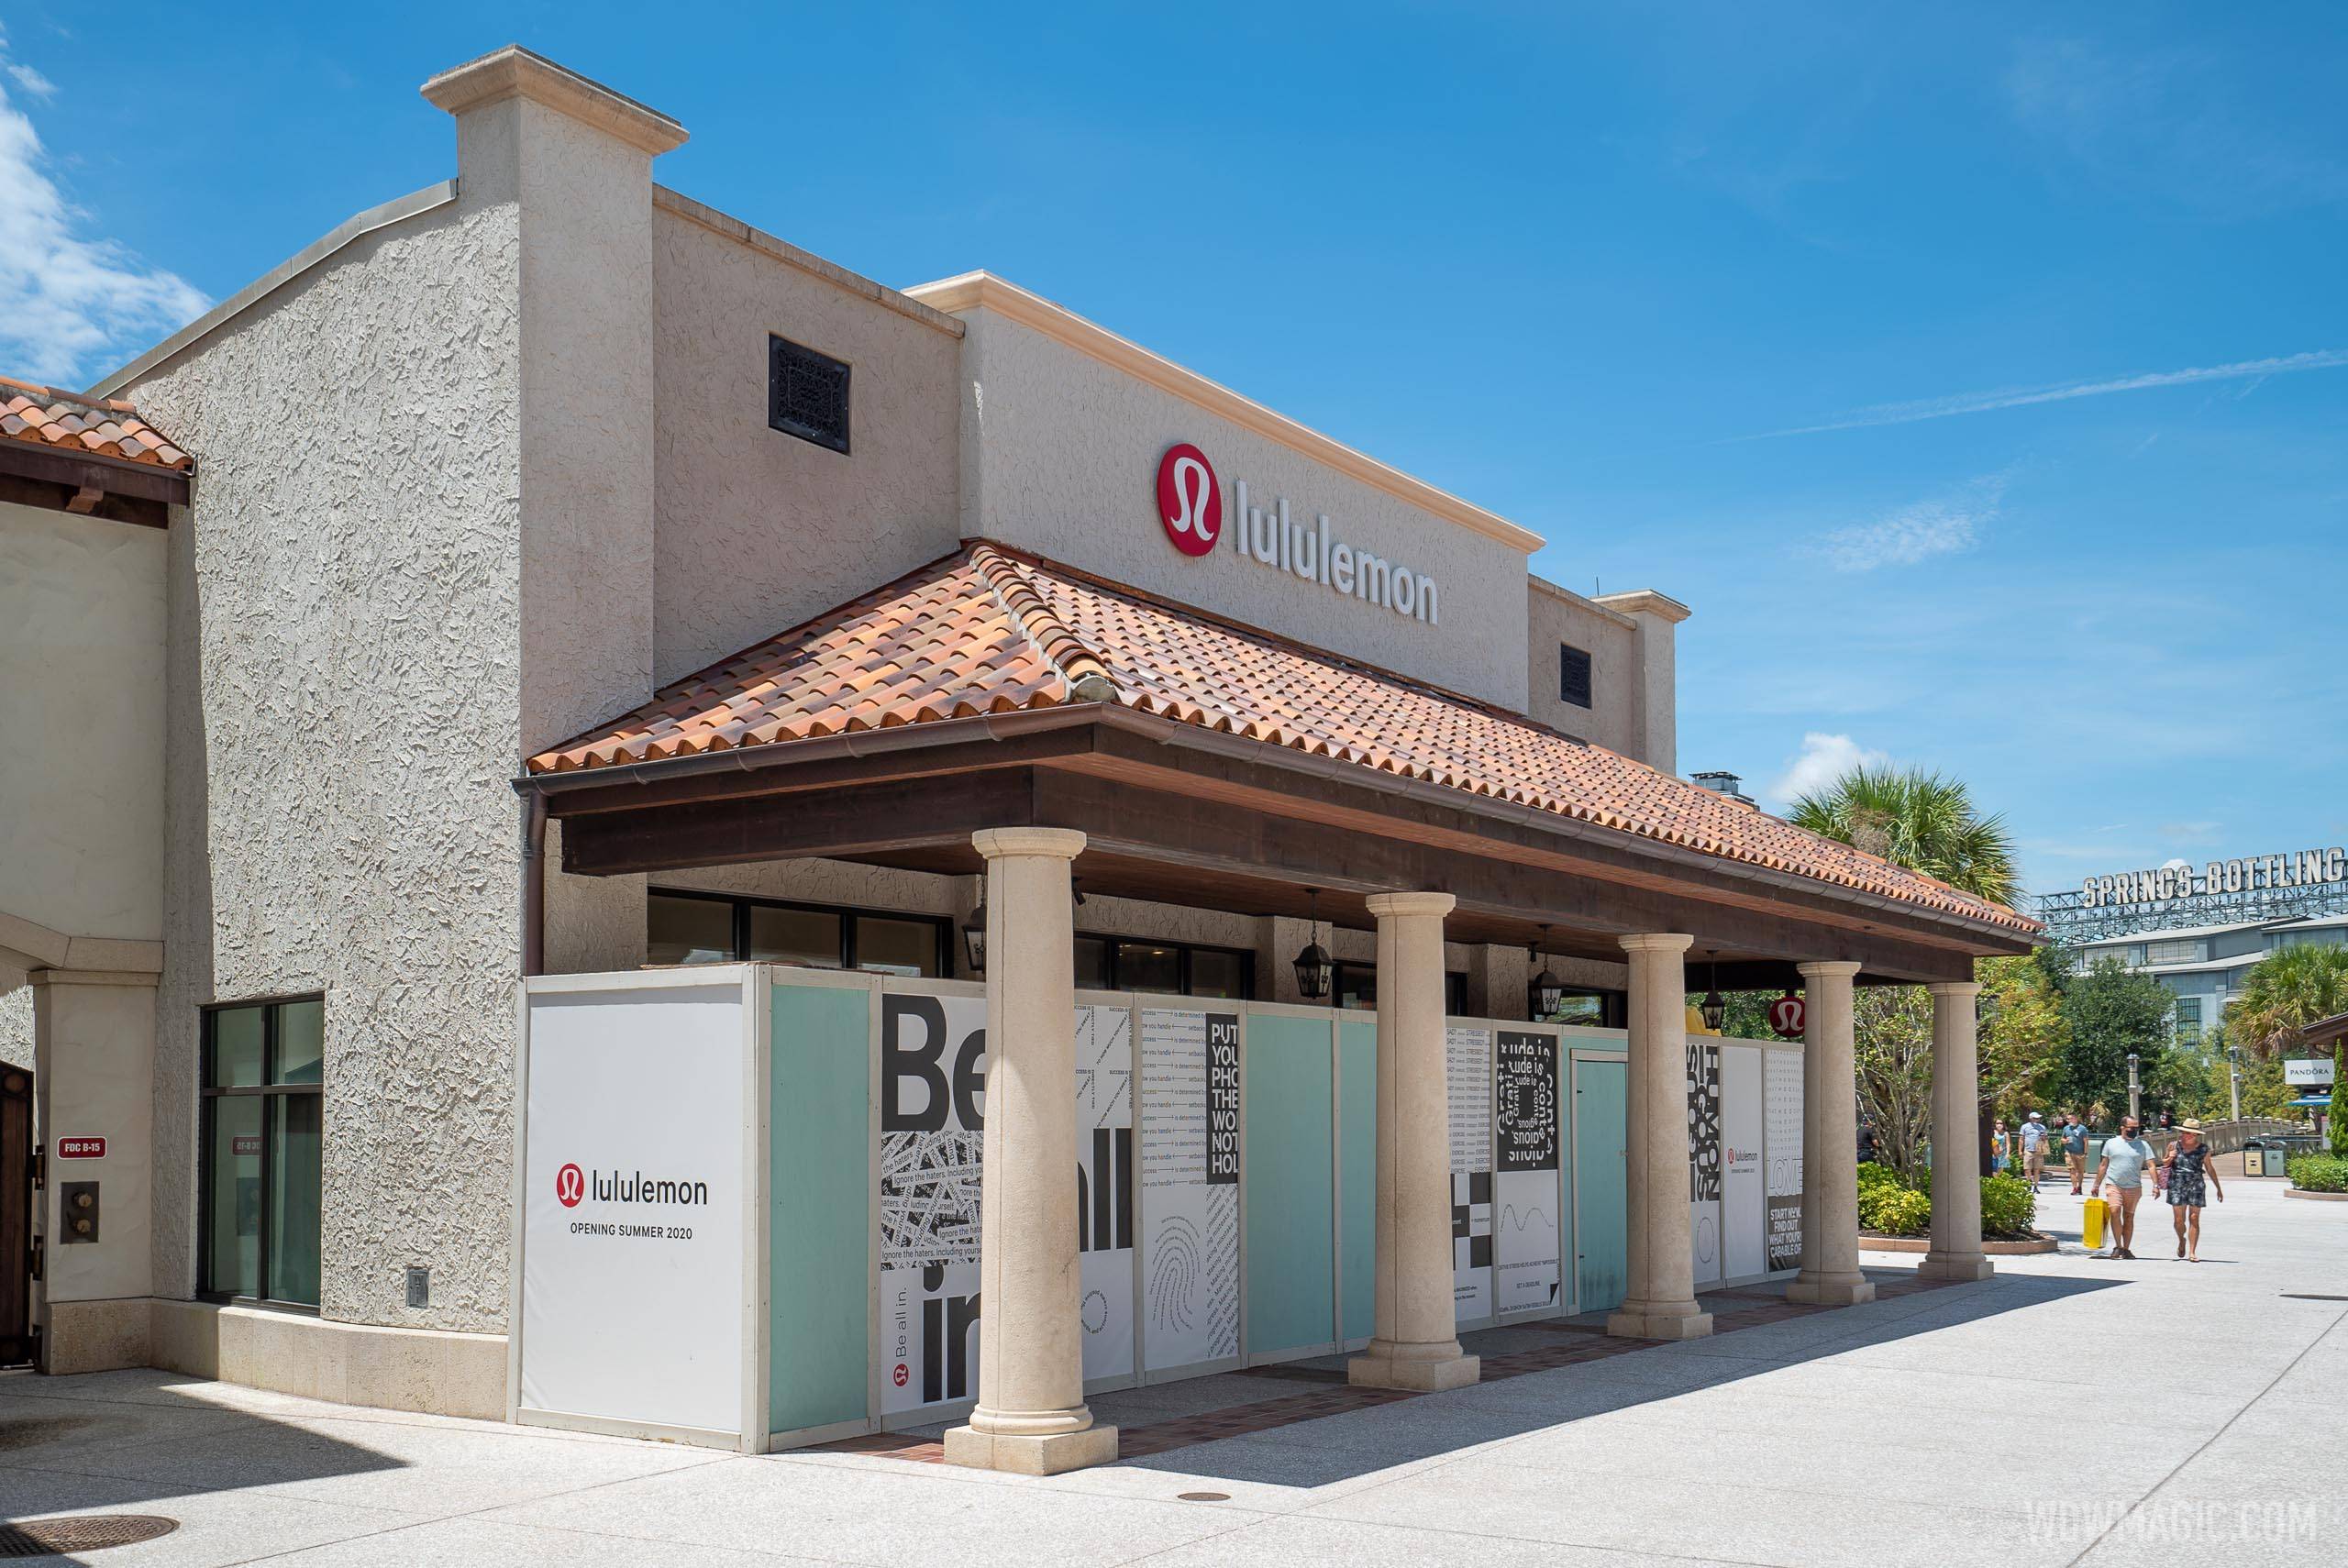 PHOTOS - New Lululemon store nears completion at Disney Springs